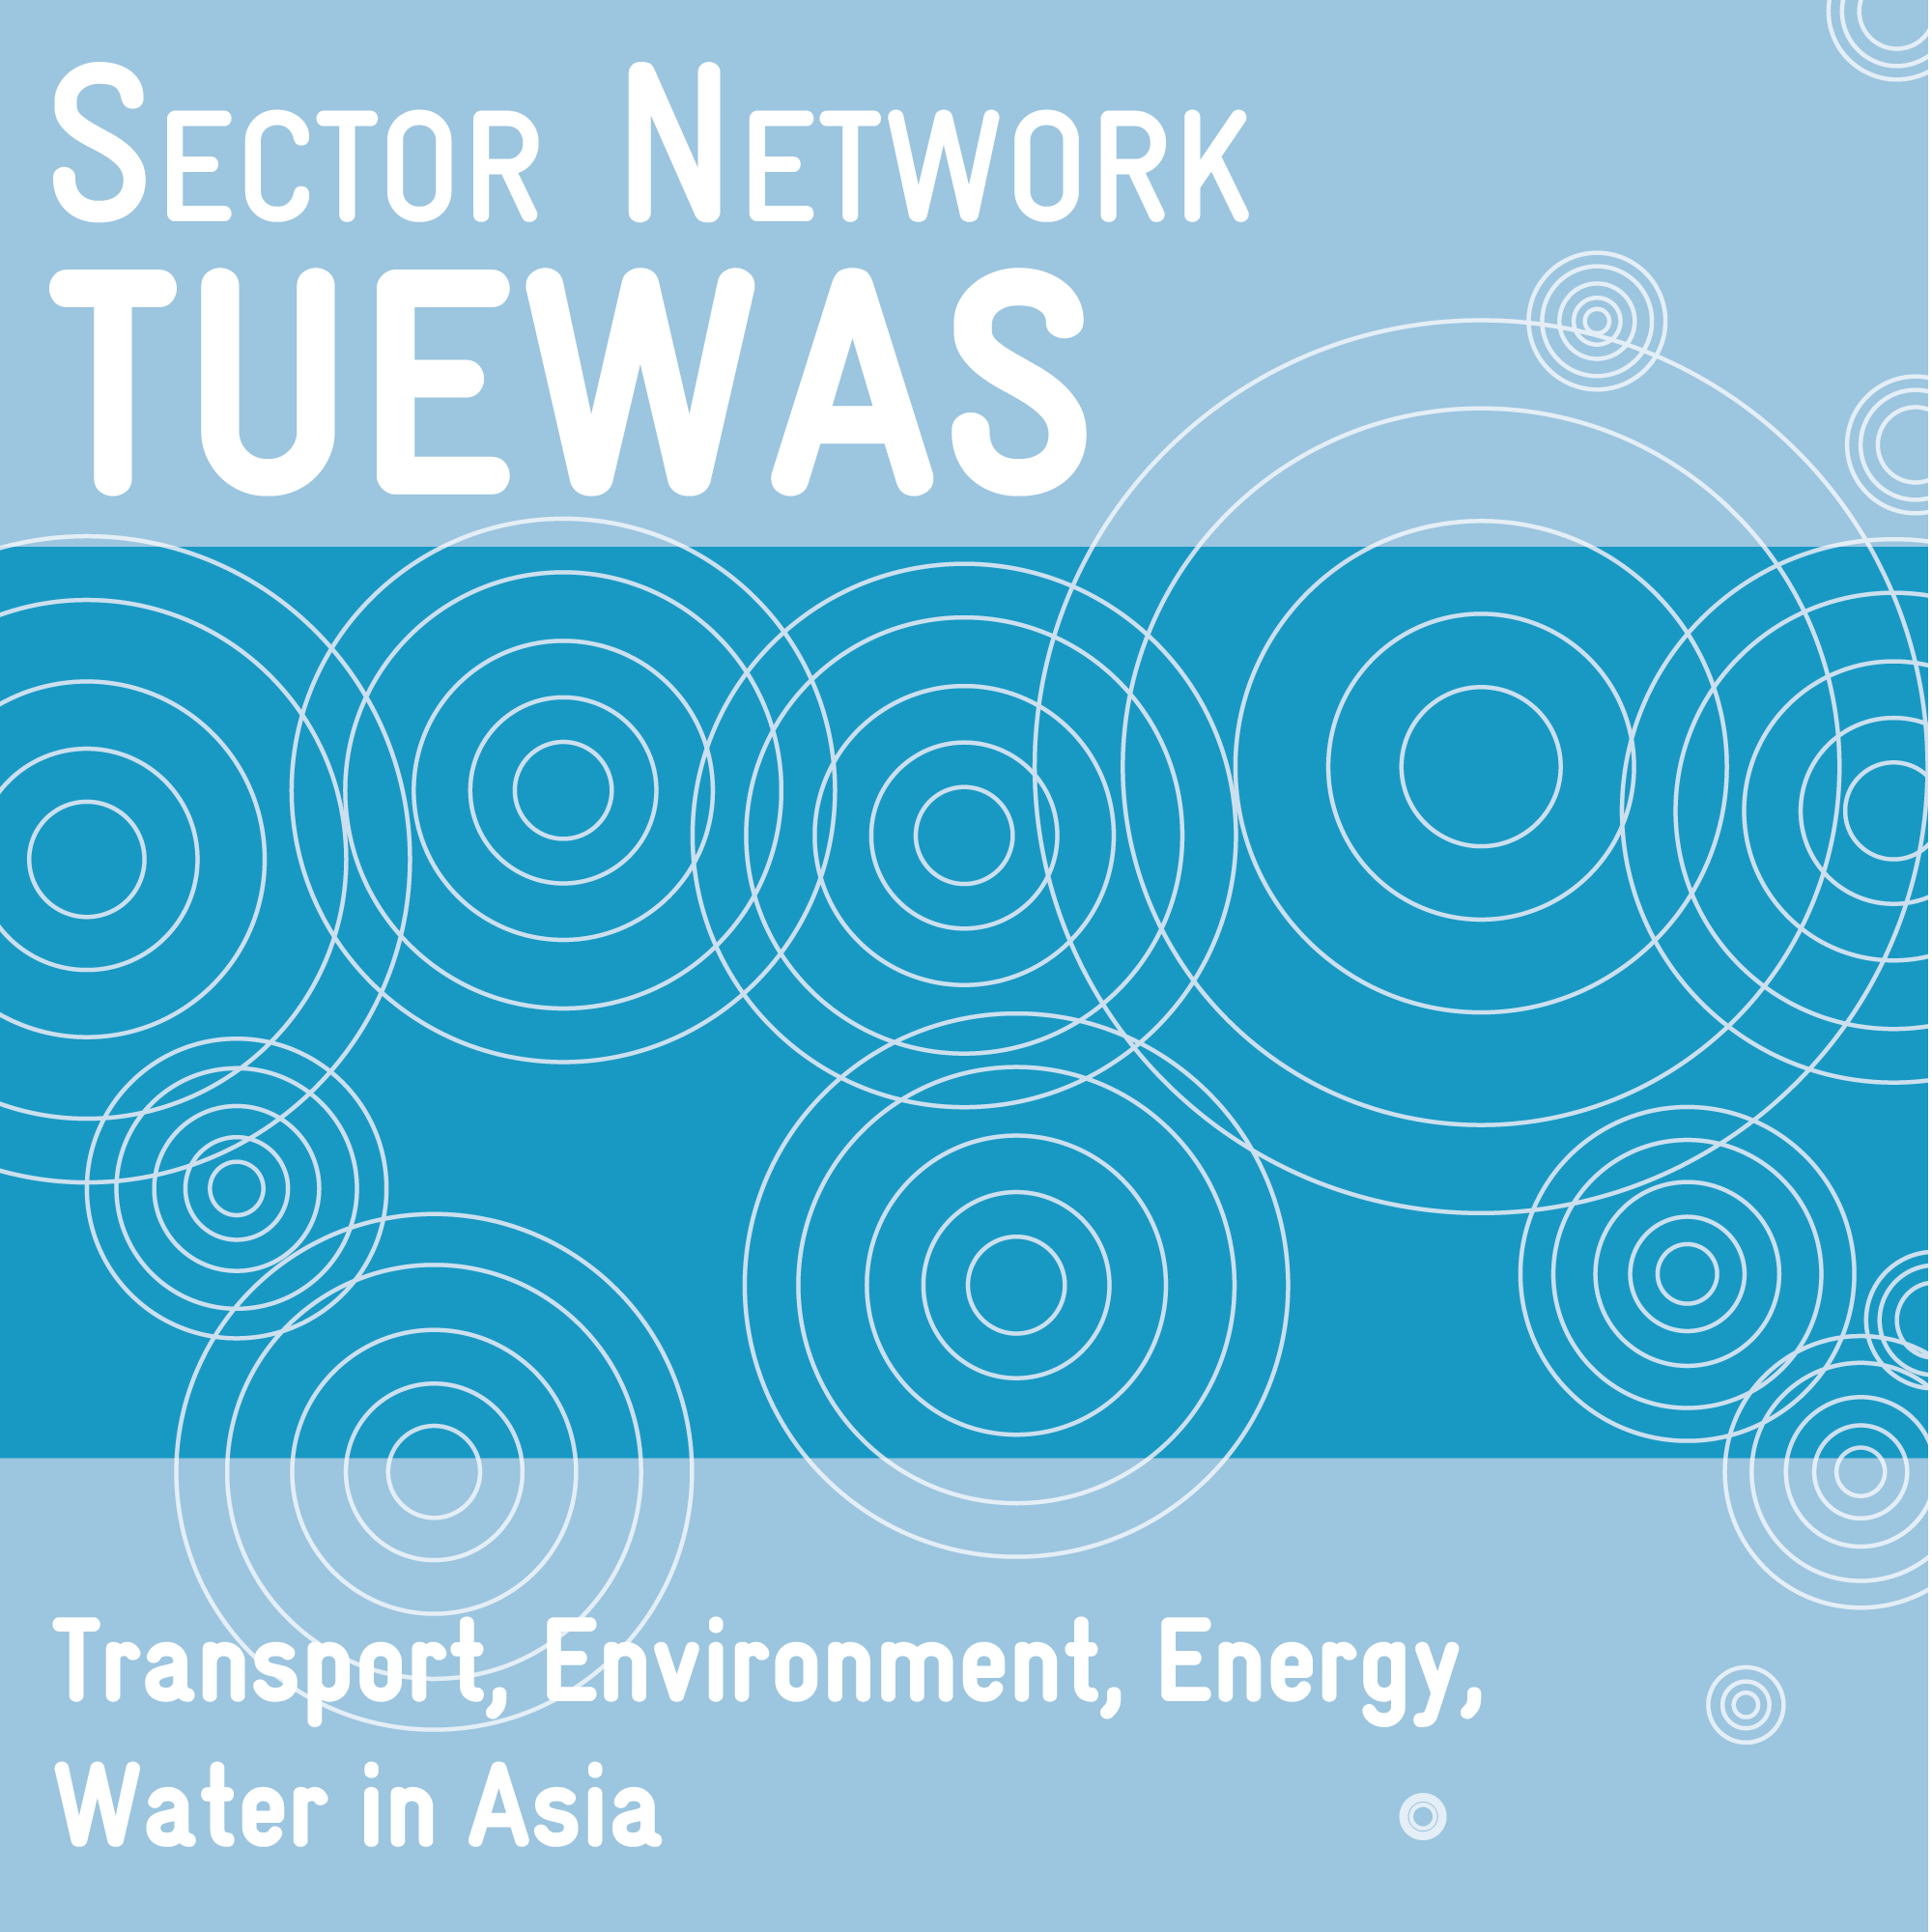 Newsletter TUEWAS (Transport, Environment, Energy and Water in Asia)